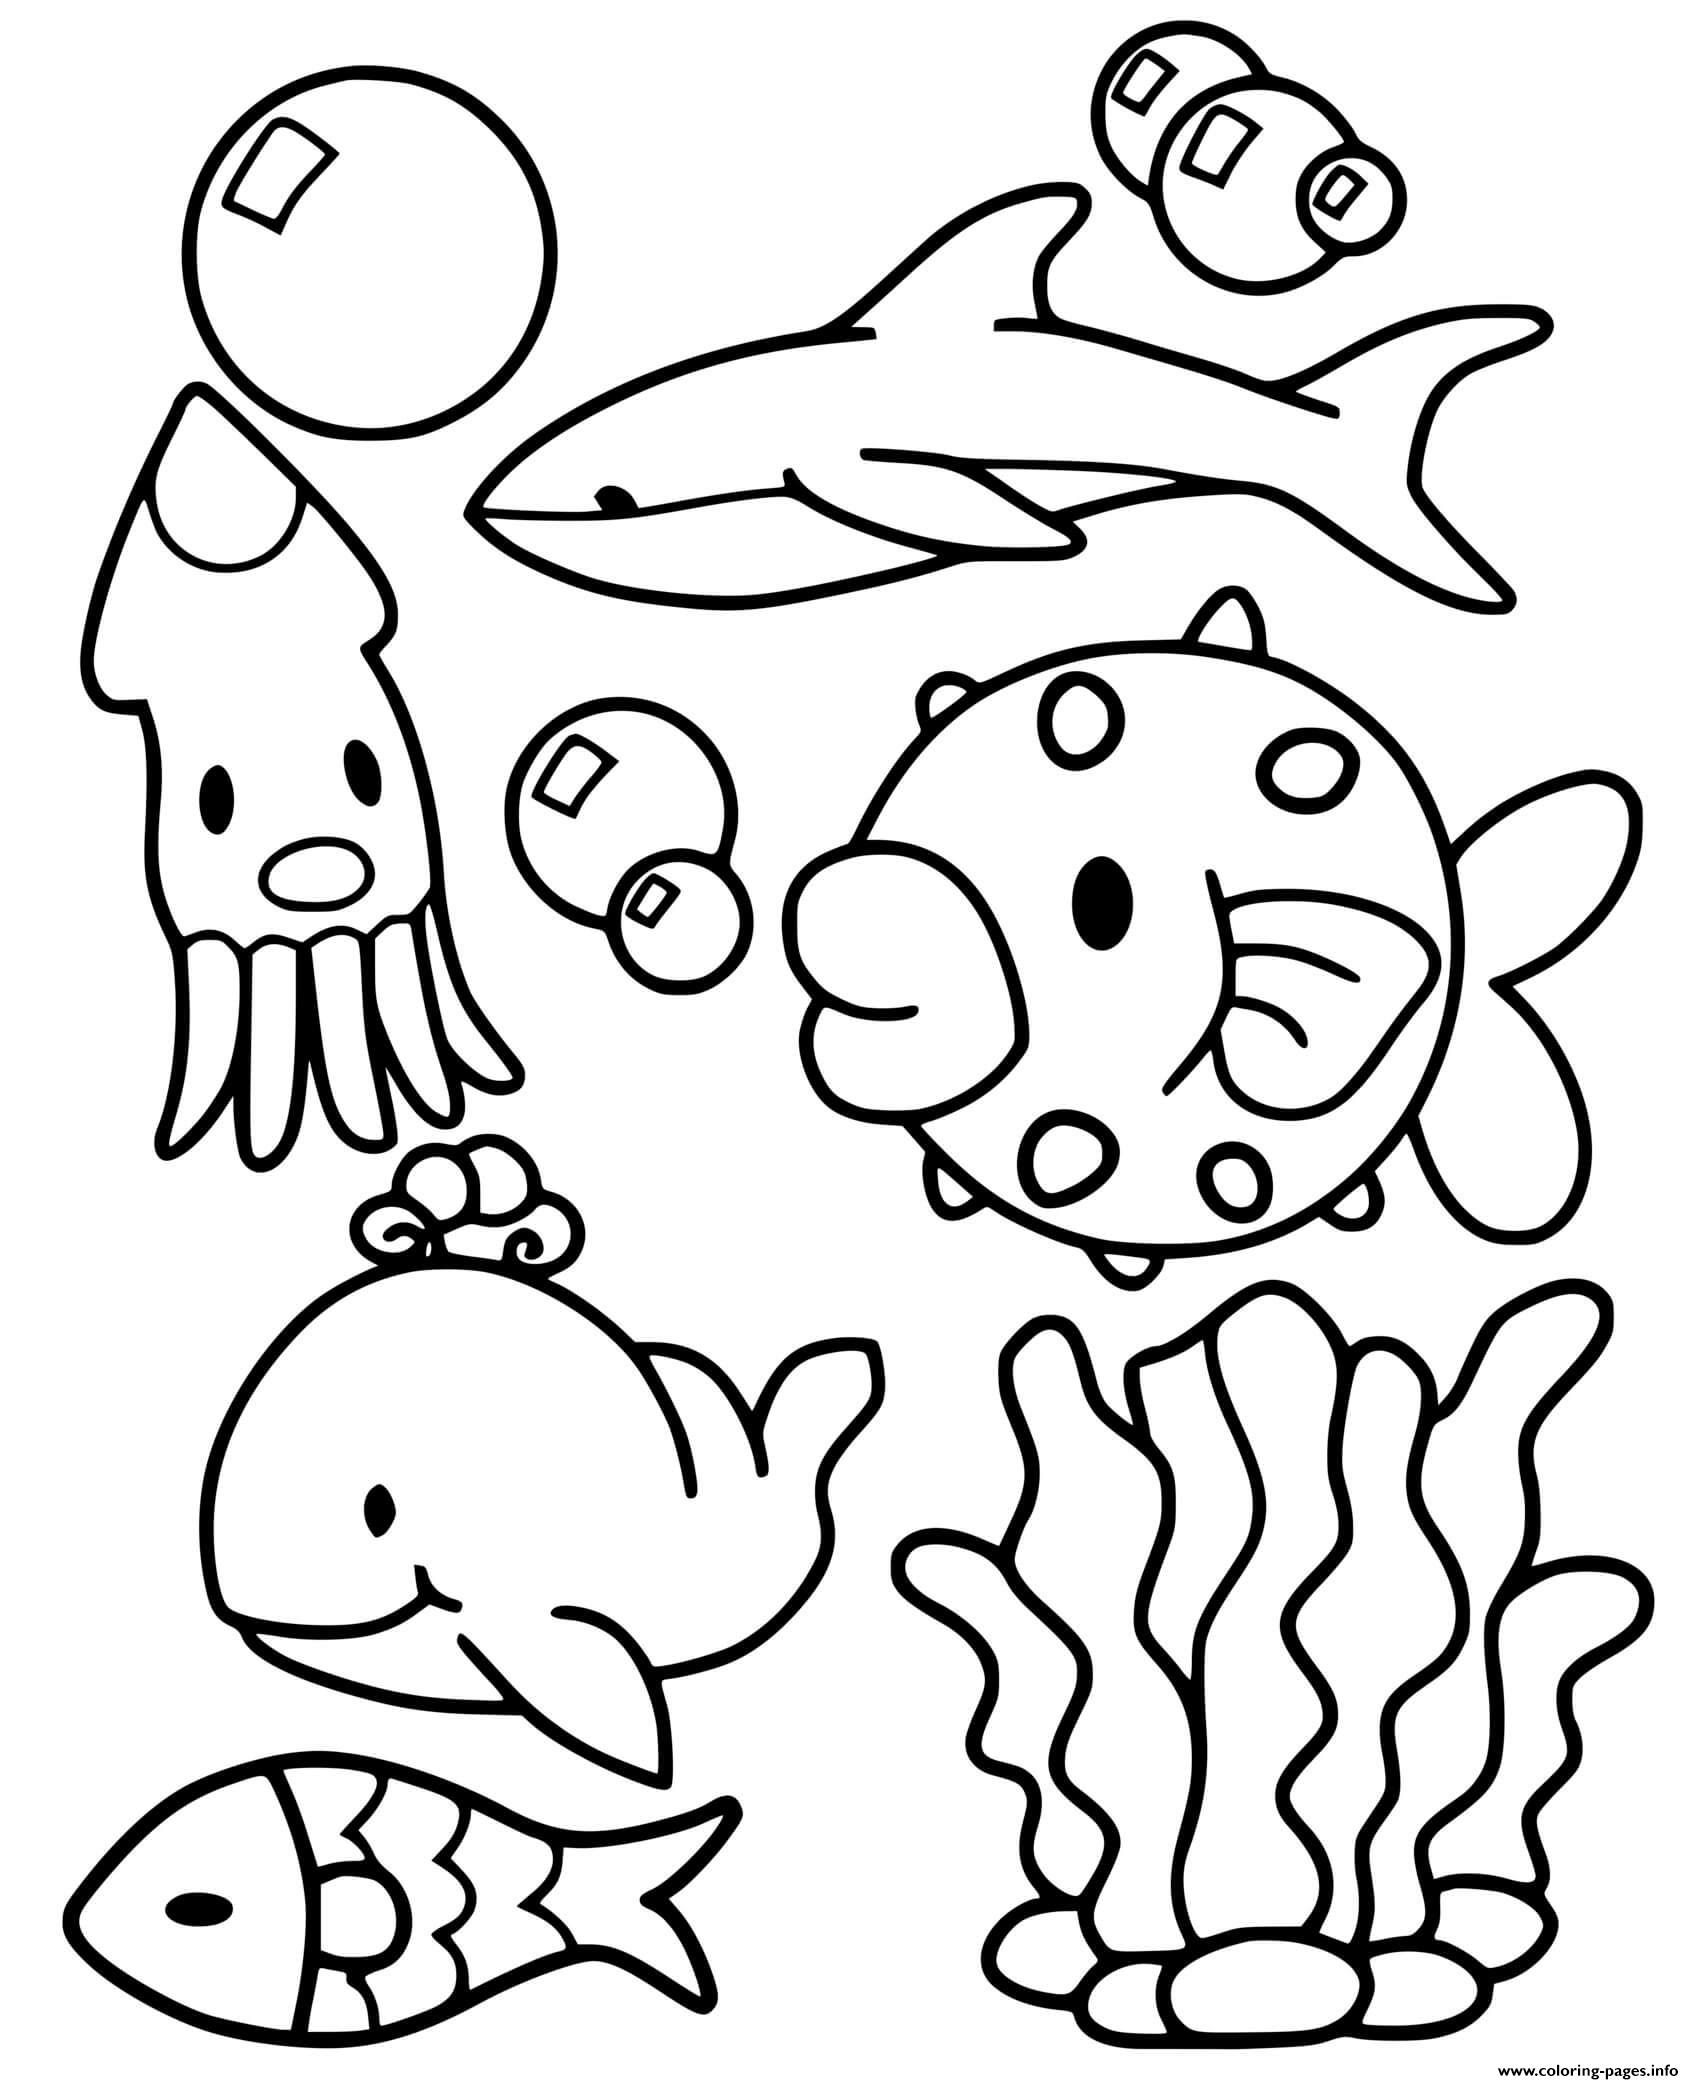 Animals Of The Sea Easy Coloring page Printable